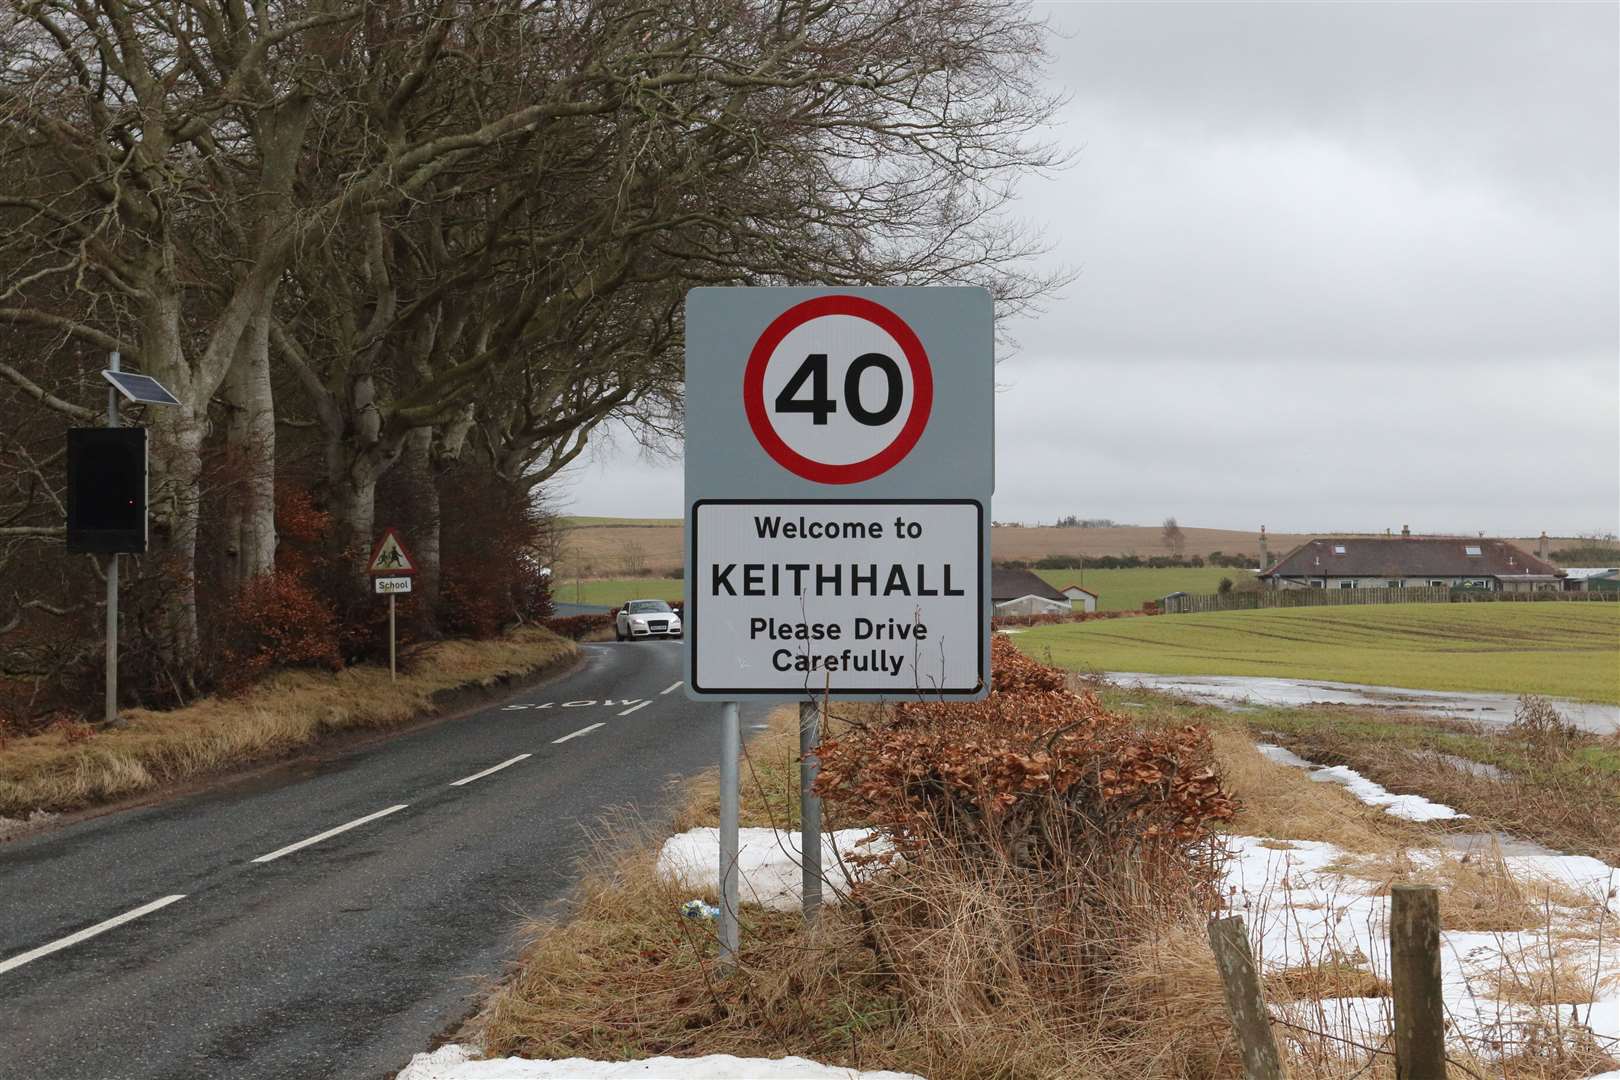 Residents of the Keithhall settlement submitted a petition to Aberdeenshire Council.